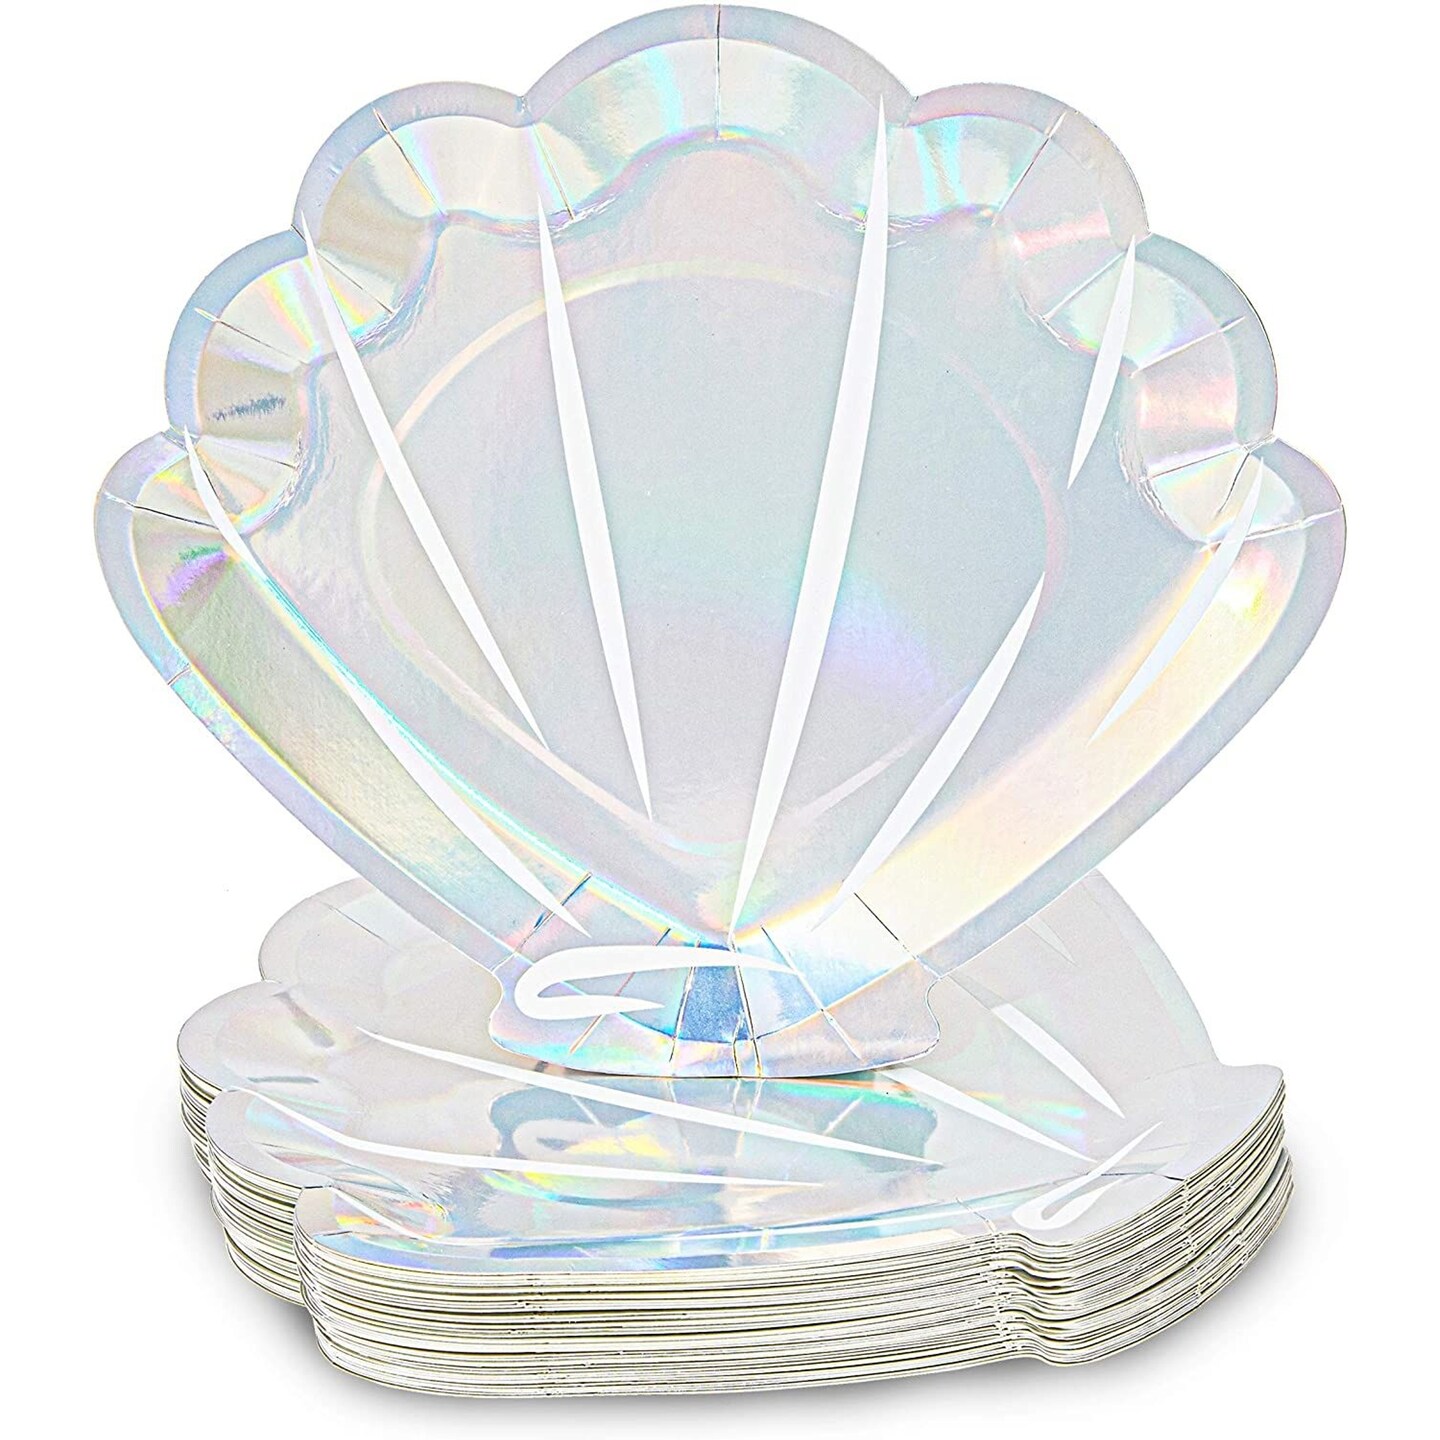 48 Pack Holographic Seashell Plates for Girls Mermaid Birthday Party Supplies, Silver Foil Design (9 In)